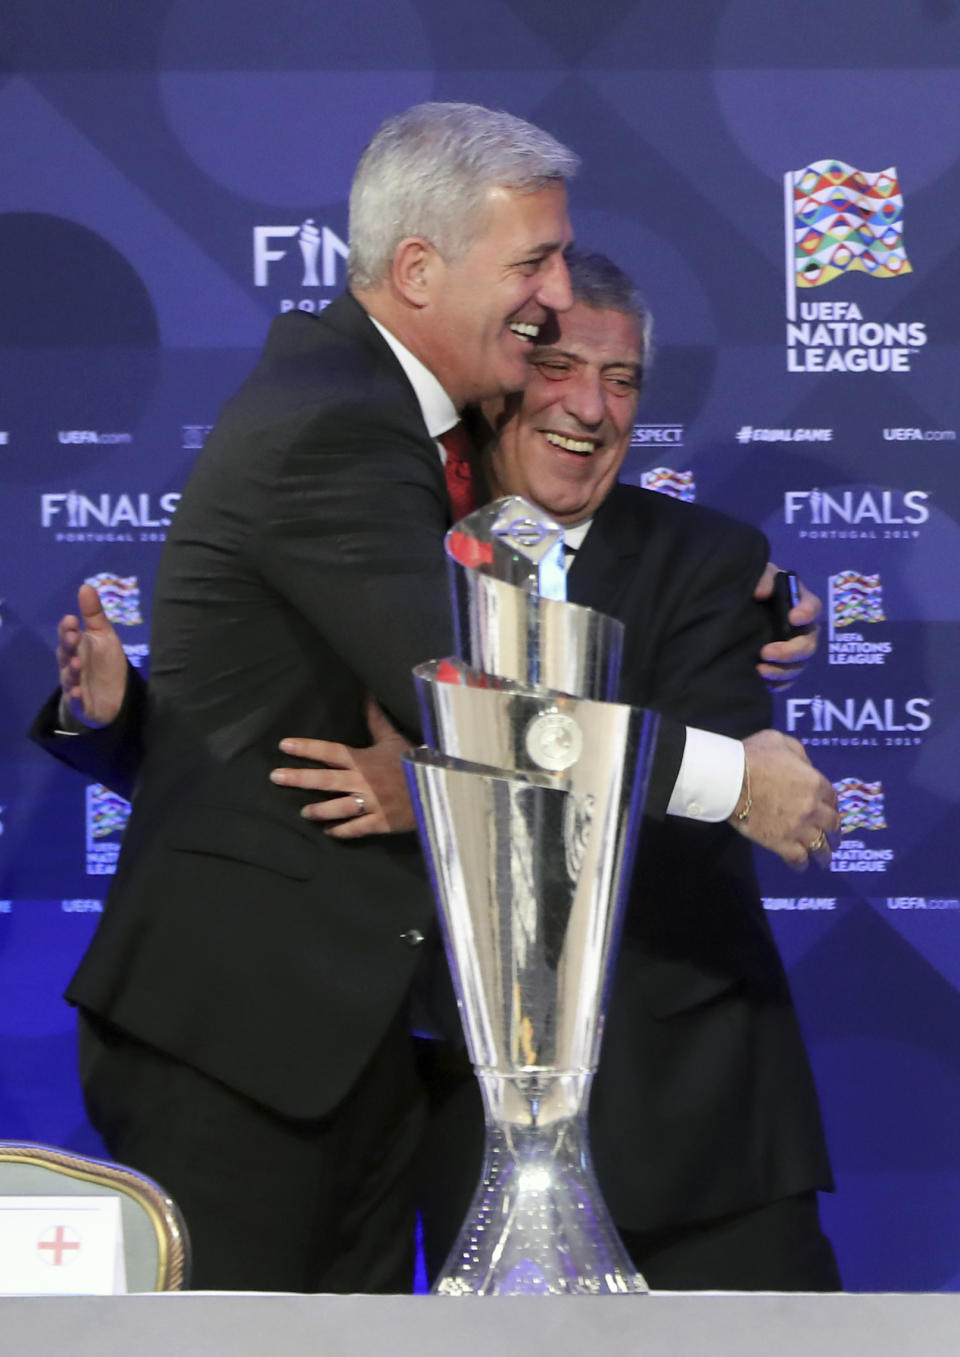 Portugal soccer team manager Fernando Santos, right, and Switzerland manager Vladimir Petkovic embrace during a press conference after the UEFA Nations League Finals draw at the Shelbourne Hotel, Dublin, Monday Dec. 3, 2018. (Niall Carson/PA via AP)